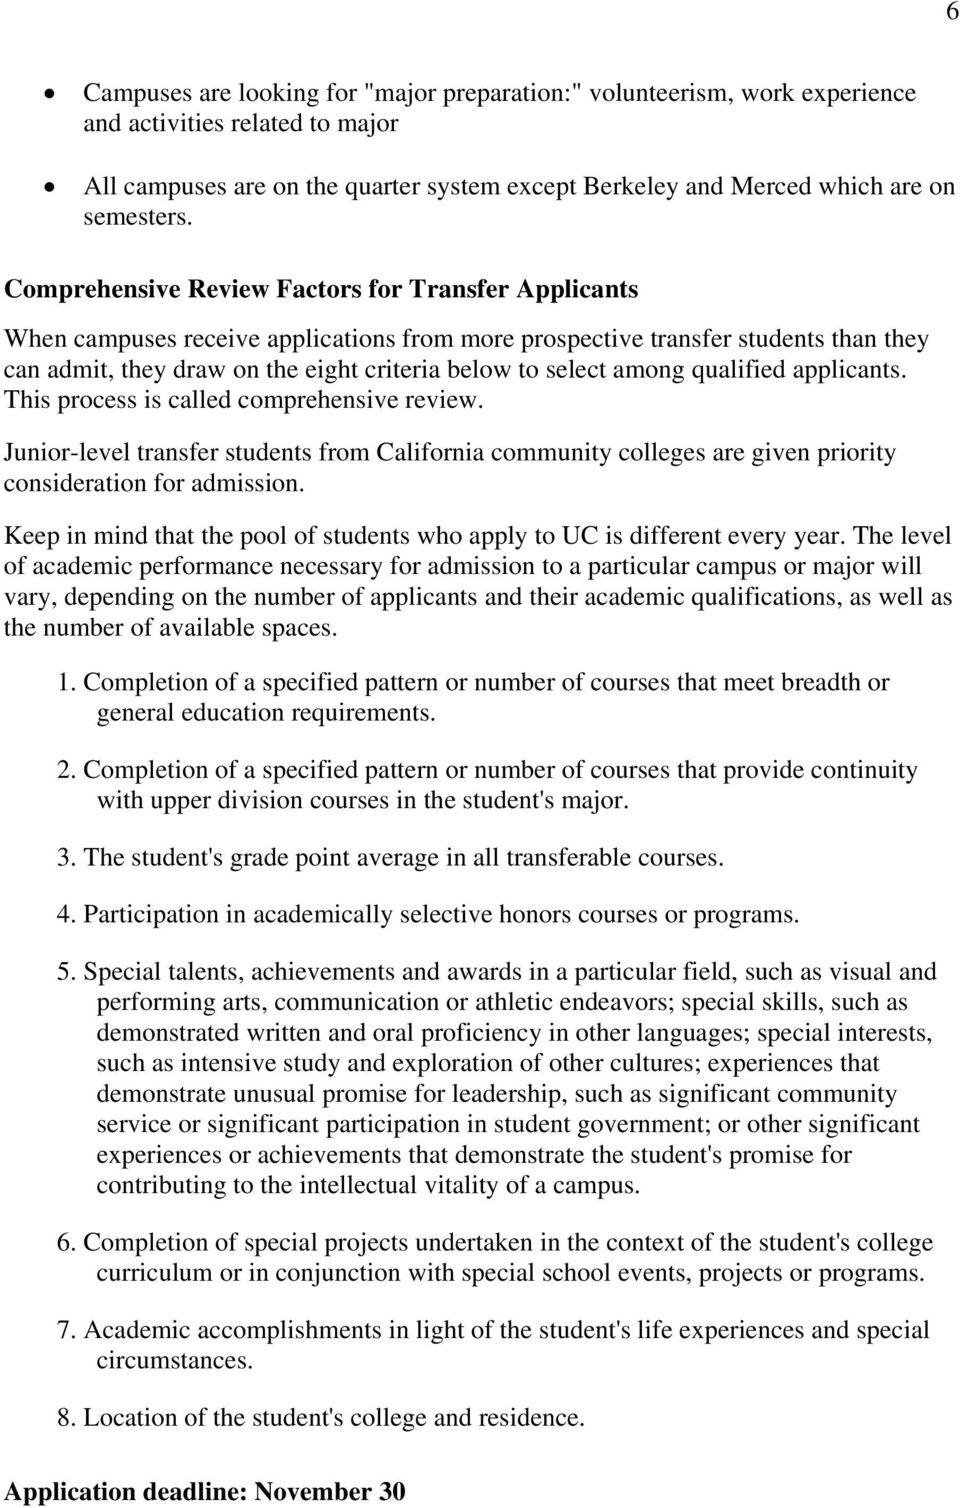 among qualified applicants. This process is called comprehensive review. Junior-level transfer students from California community colleges are given priority consideration for admission.